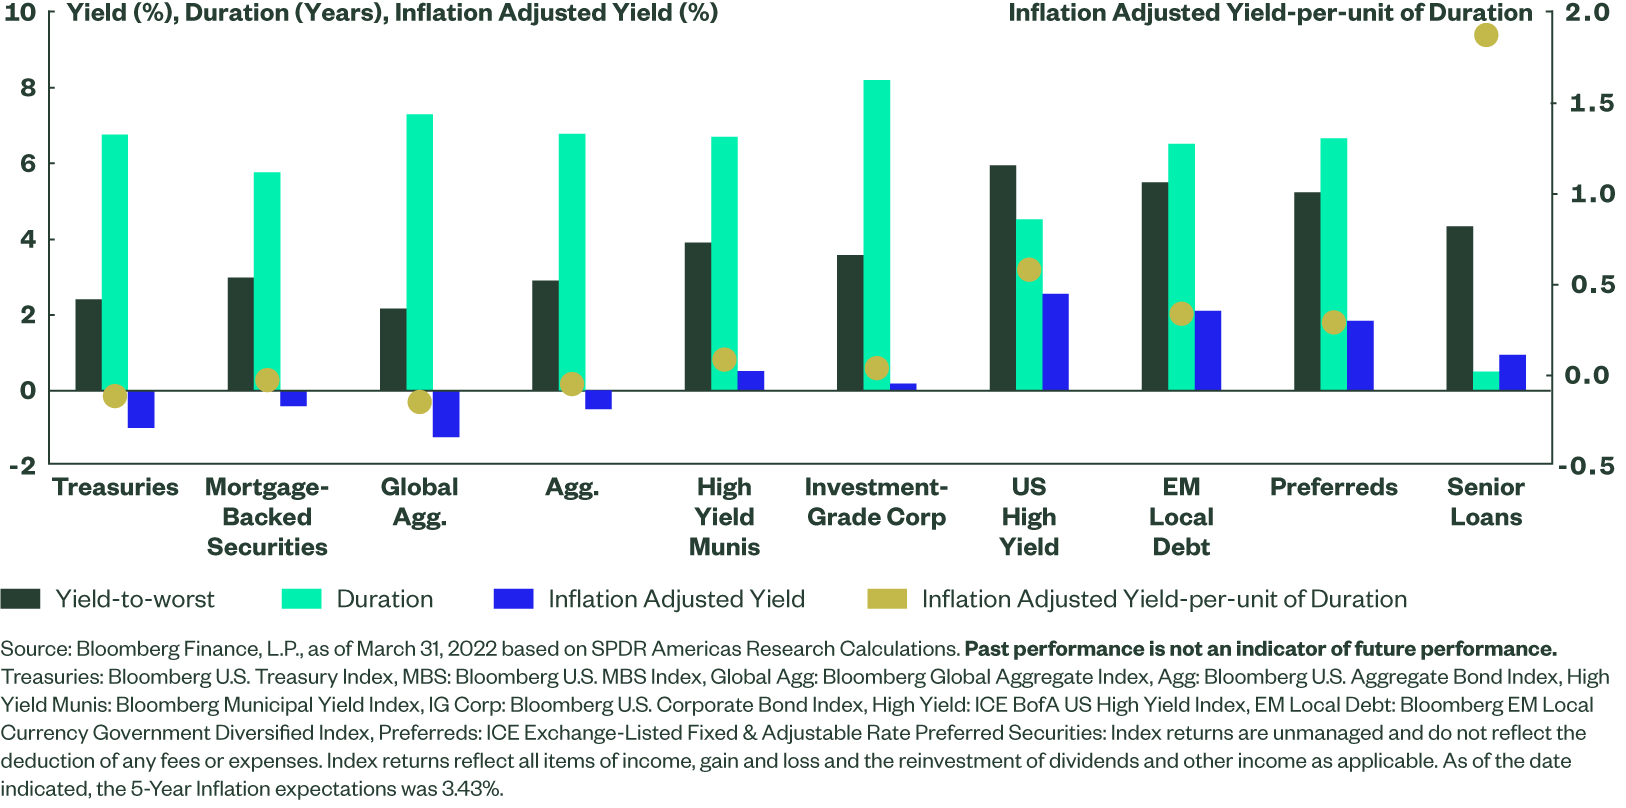 Bond Market Inflation Adjusted Yield Opportunities